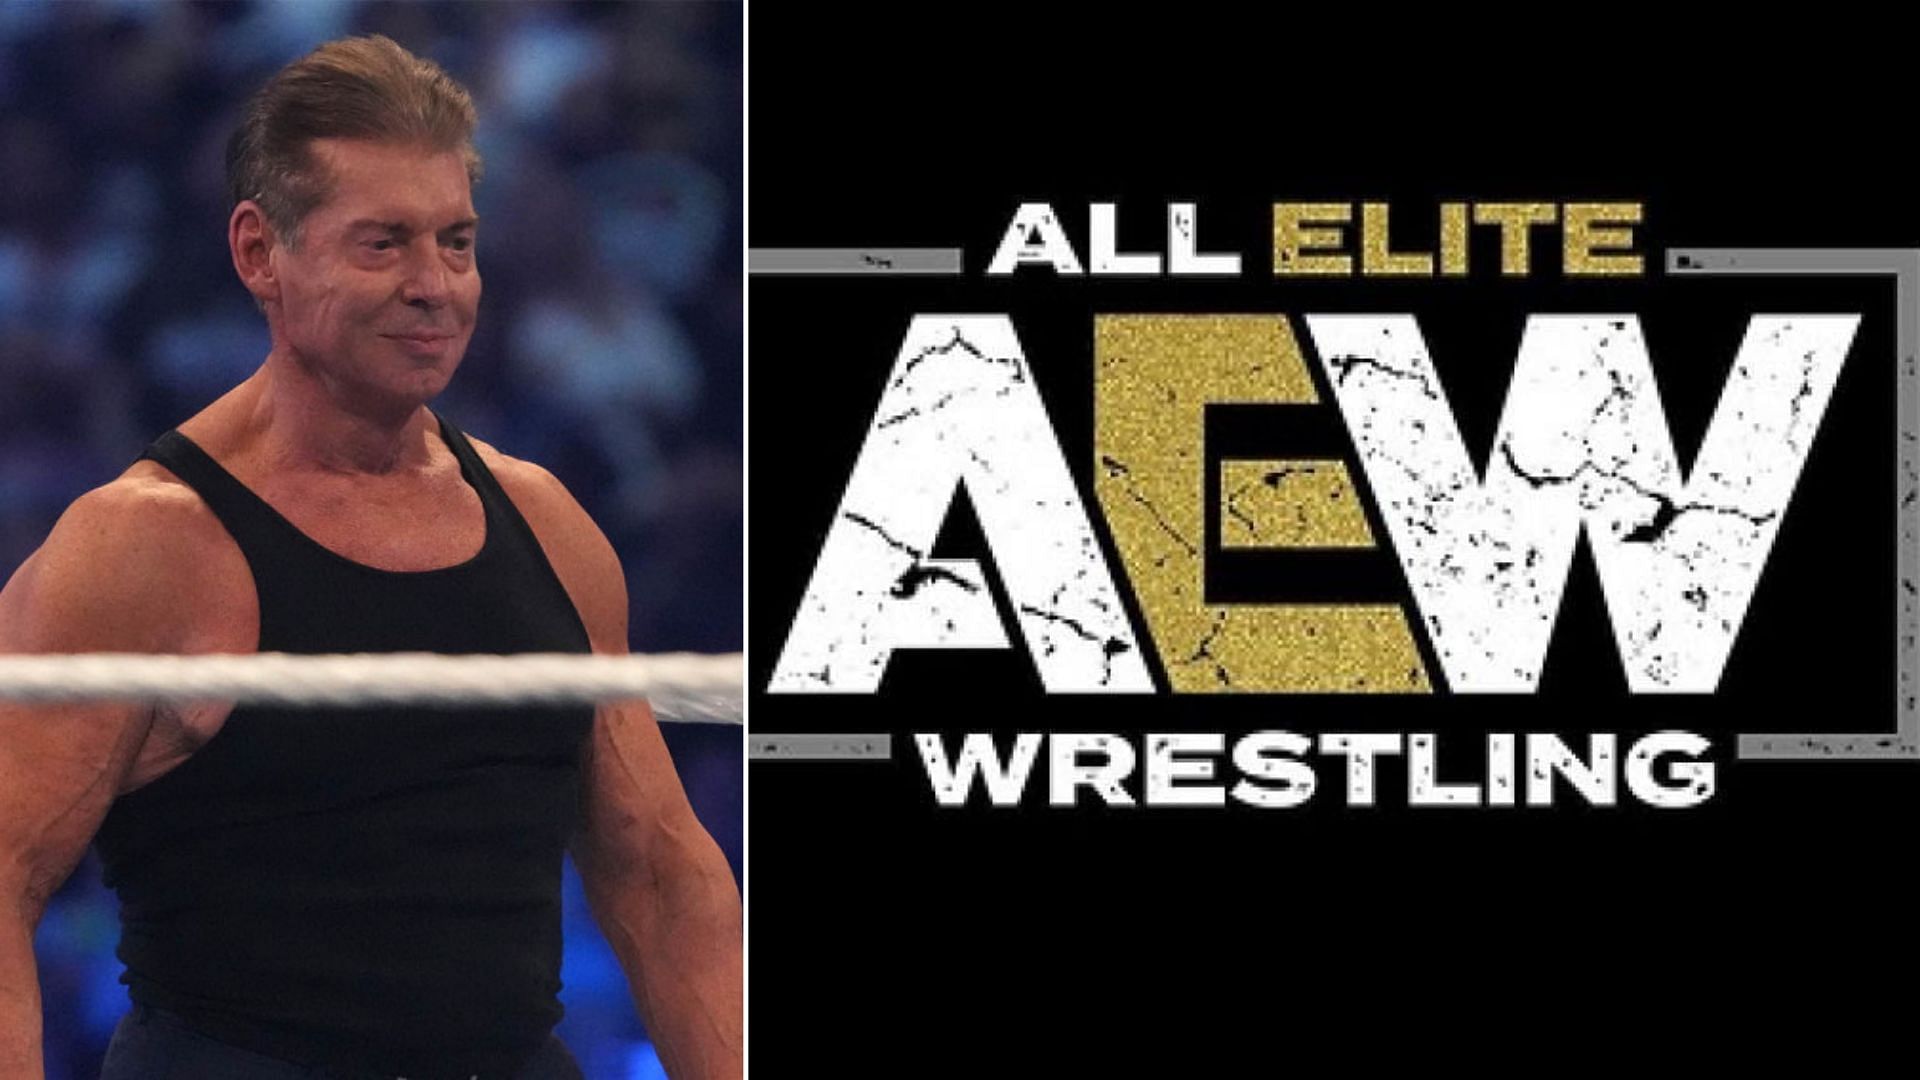 Could Vince McMahon declare himself as All-Elite?